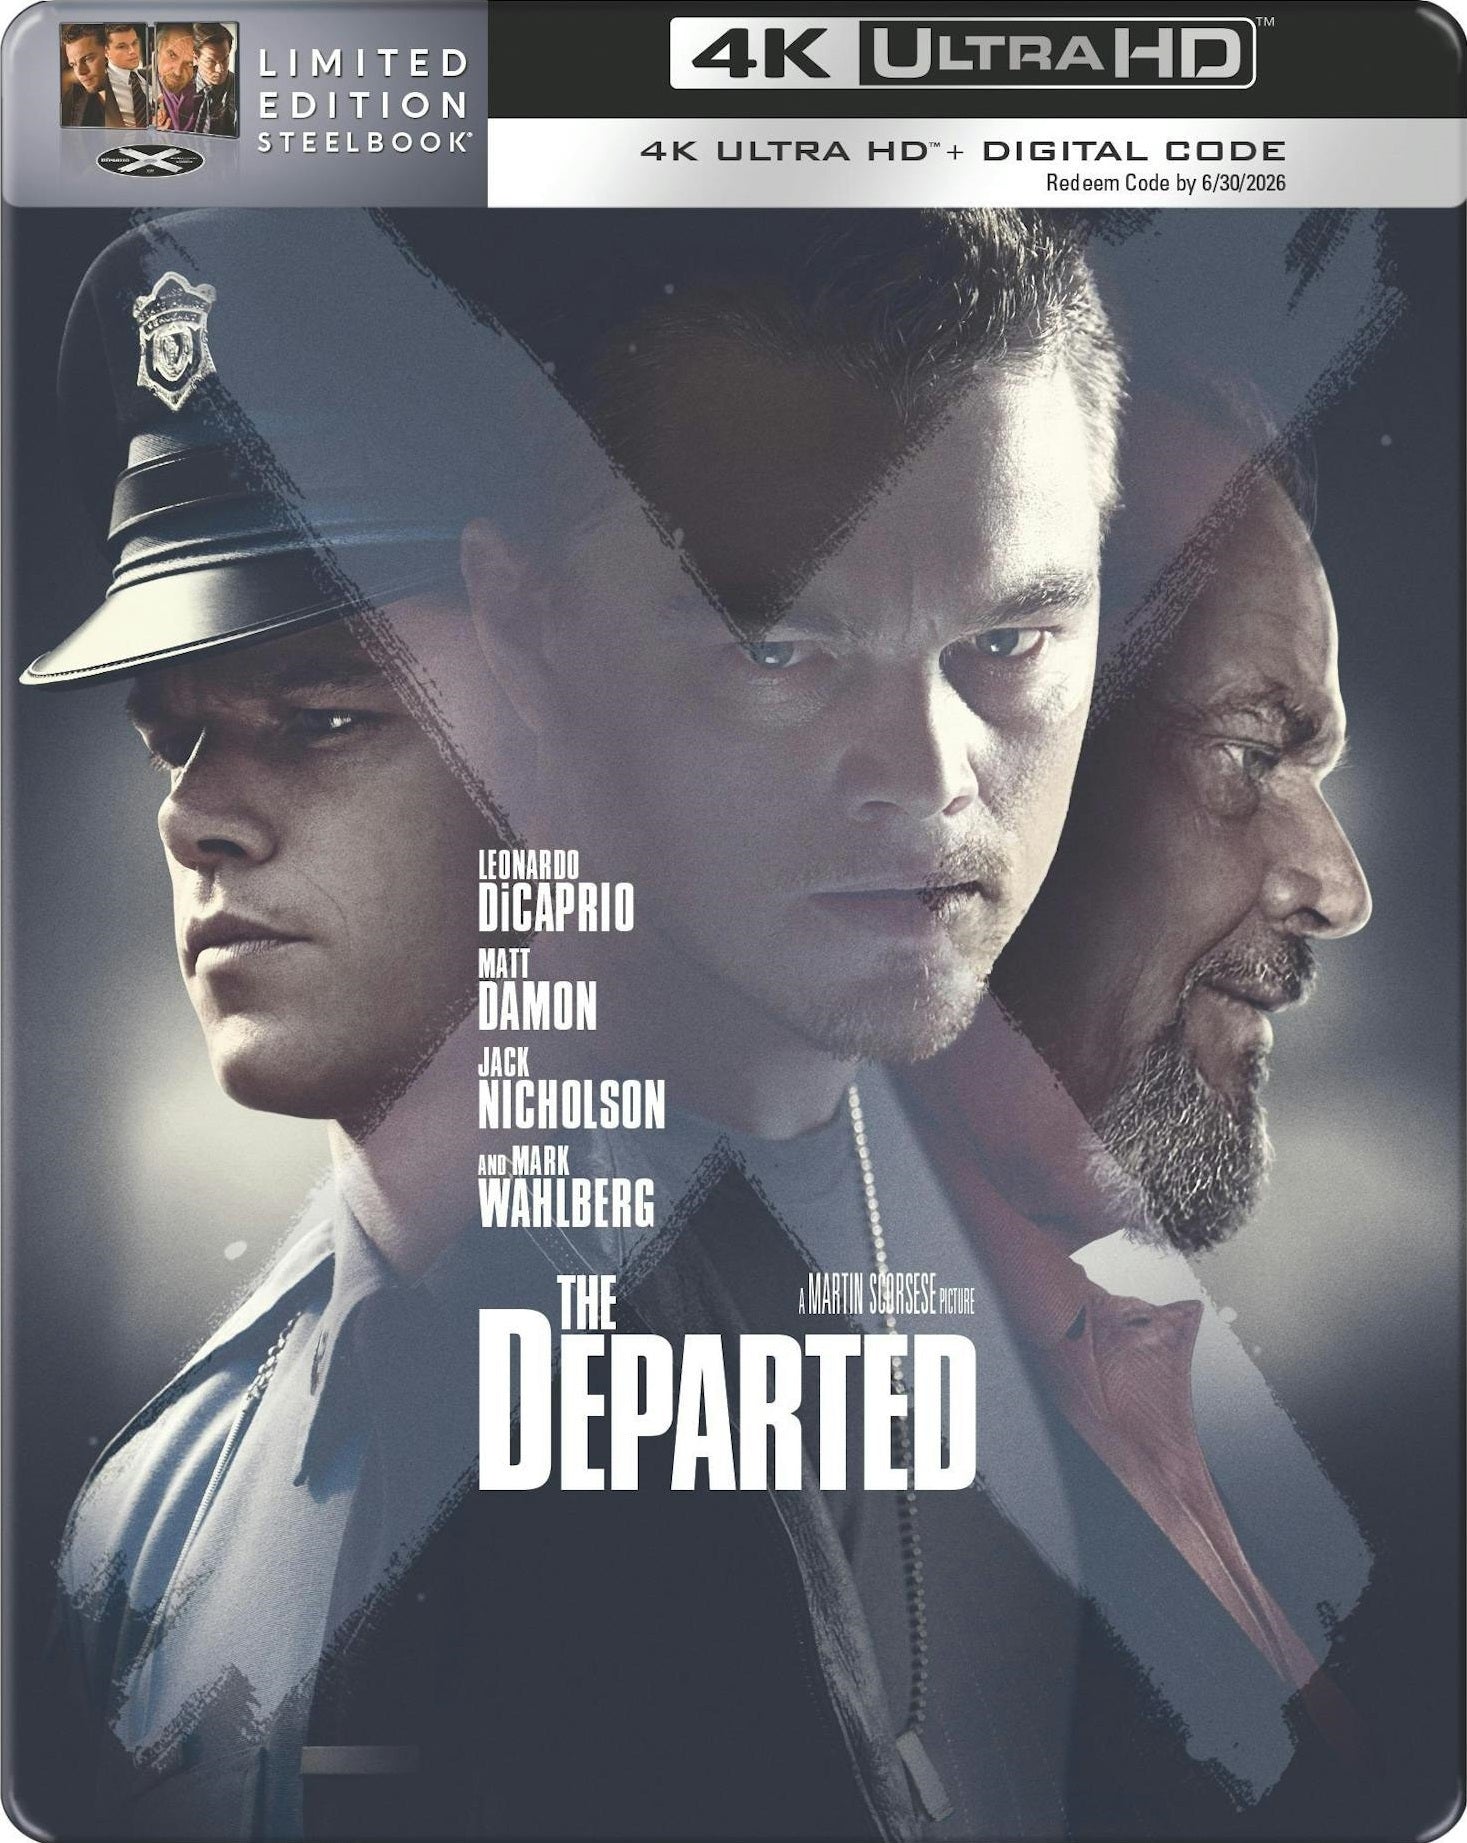 THE DEPARTED (LIMITED EDITION) 4K UHD STEELBOOK [PRE-ORDER]